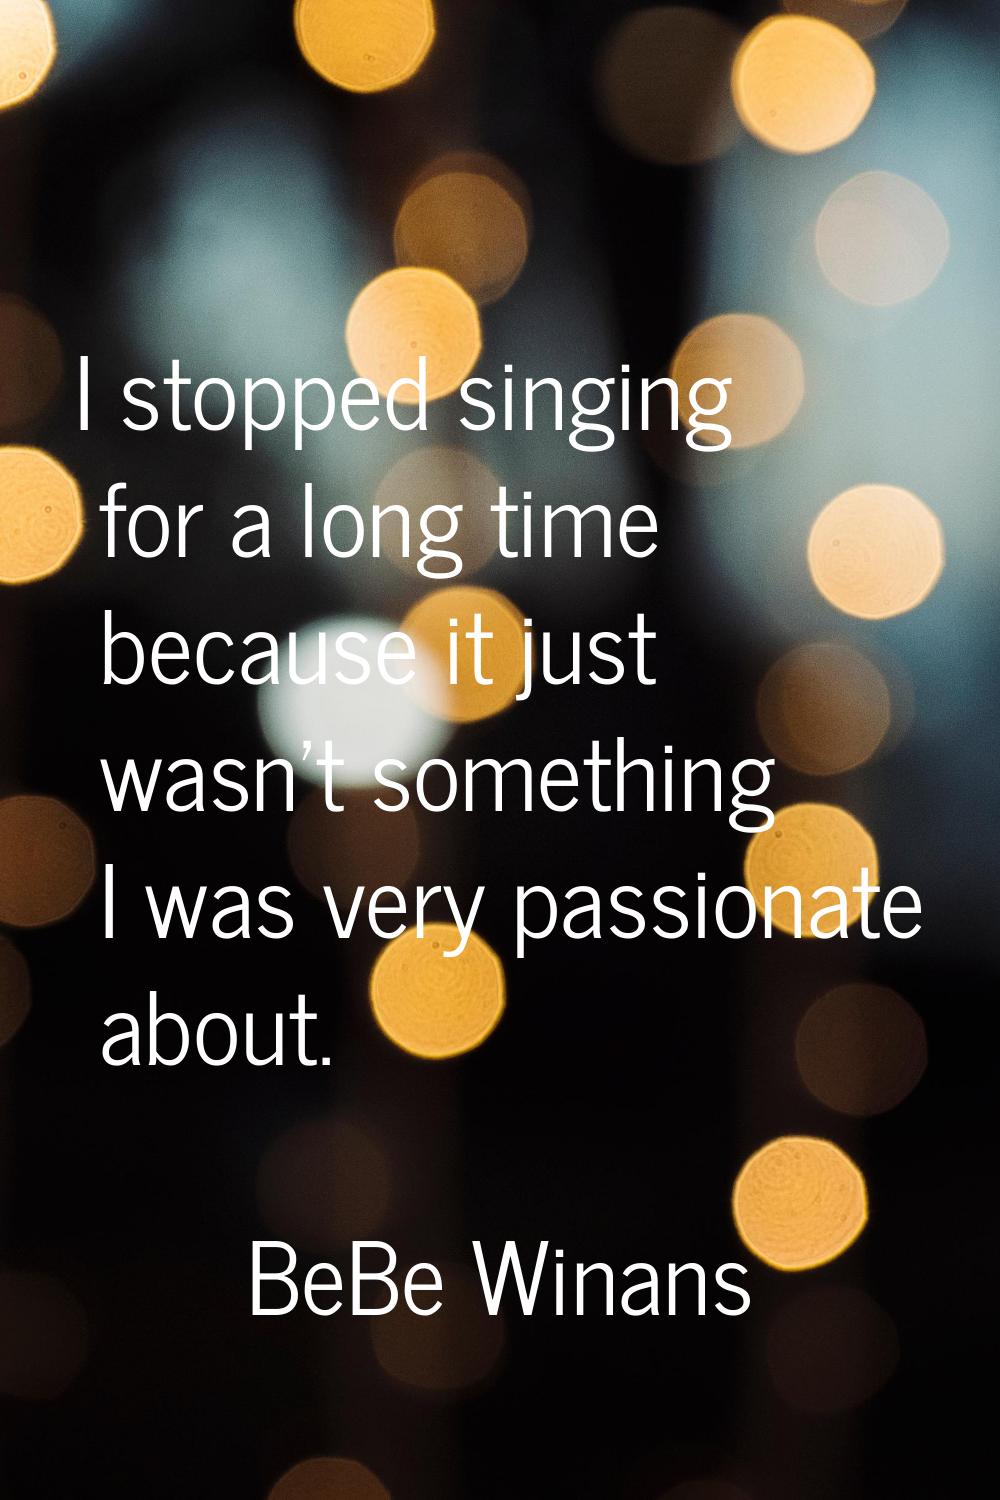 I stopped singing for a long time because it just wasn't something I was very passionate about.